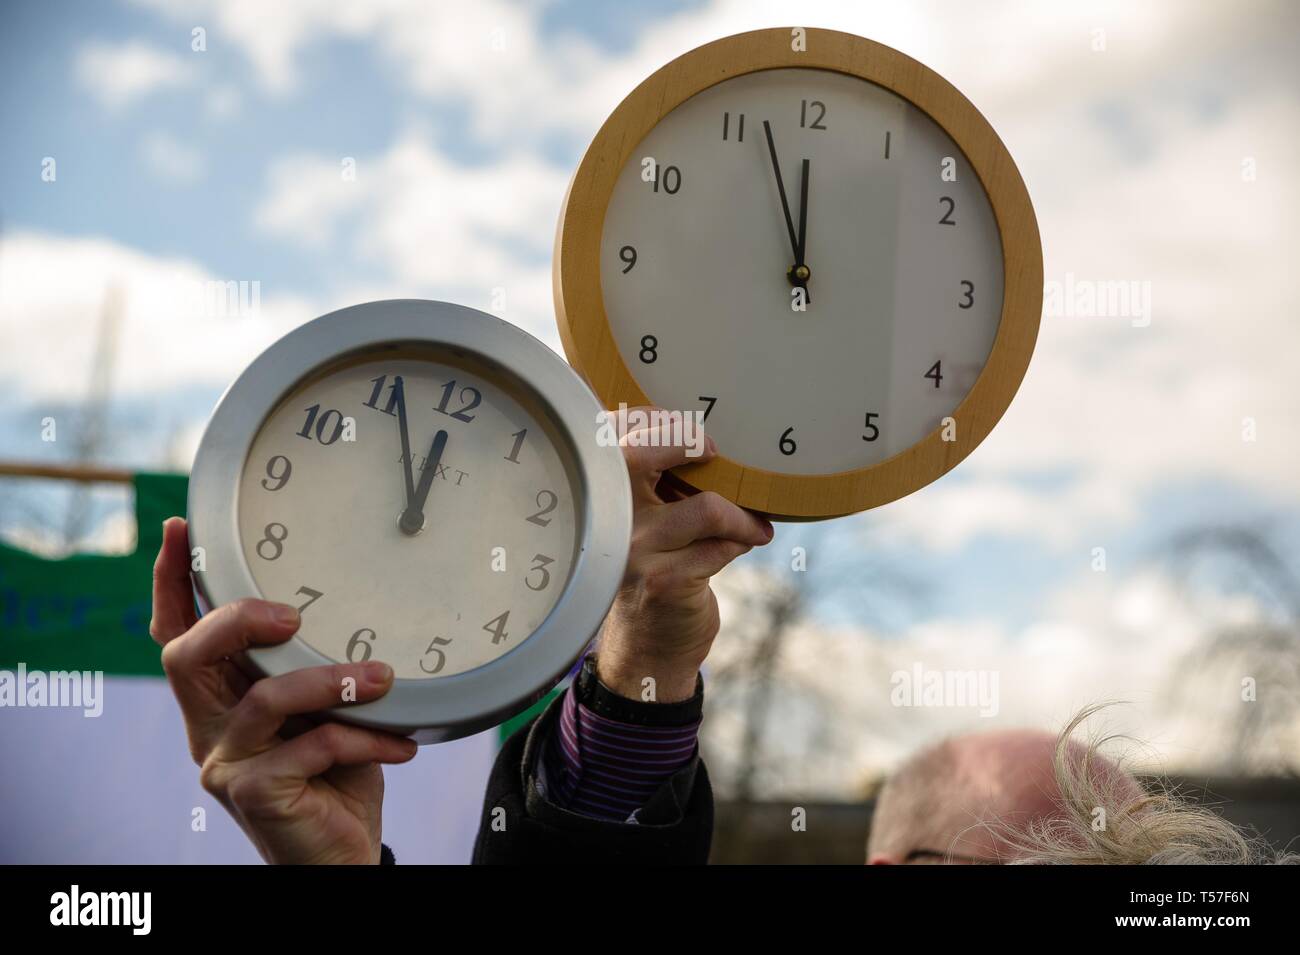 Edinburgh, Lothian, UK. 2nd Apr, 2019. Protesters seen holding up clocks during the demonstration.Environmental campaigners staged a protest outside of the Scottish Parliament to call on Members of Scottish Parliament for greater urgency in tackling climate change. The theme of the protest was ''Running out of Time'', Members of Scottish Parliament were debating on a new law that would shape the climate plans for the coming decades. Credit: Stewart Kirby/SOPA Images/ZUMA Wire/Alamy Live News Stock Photo